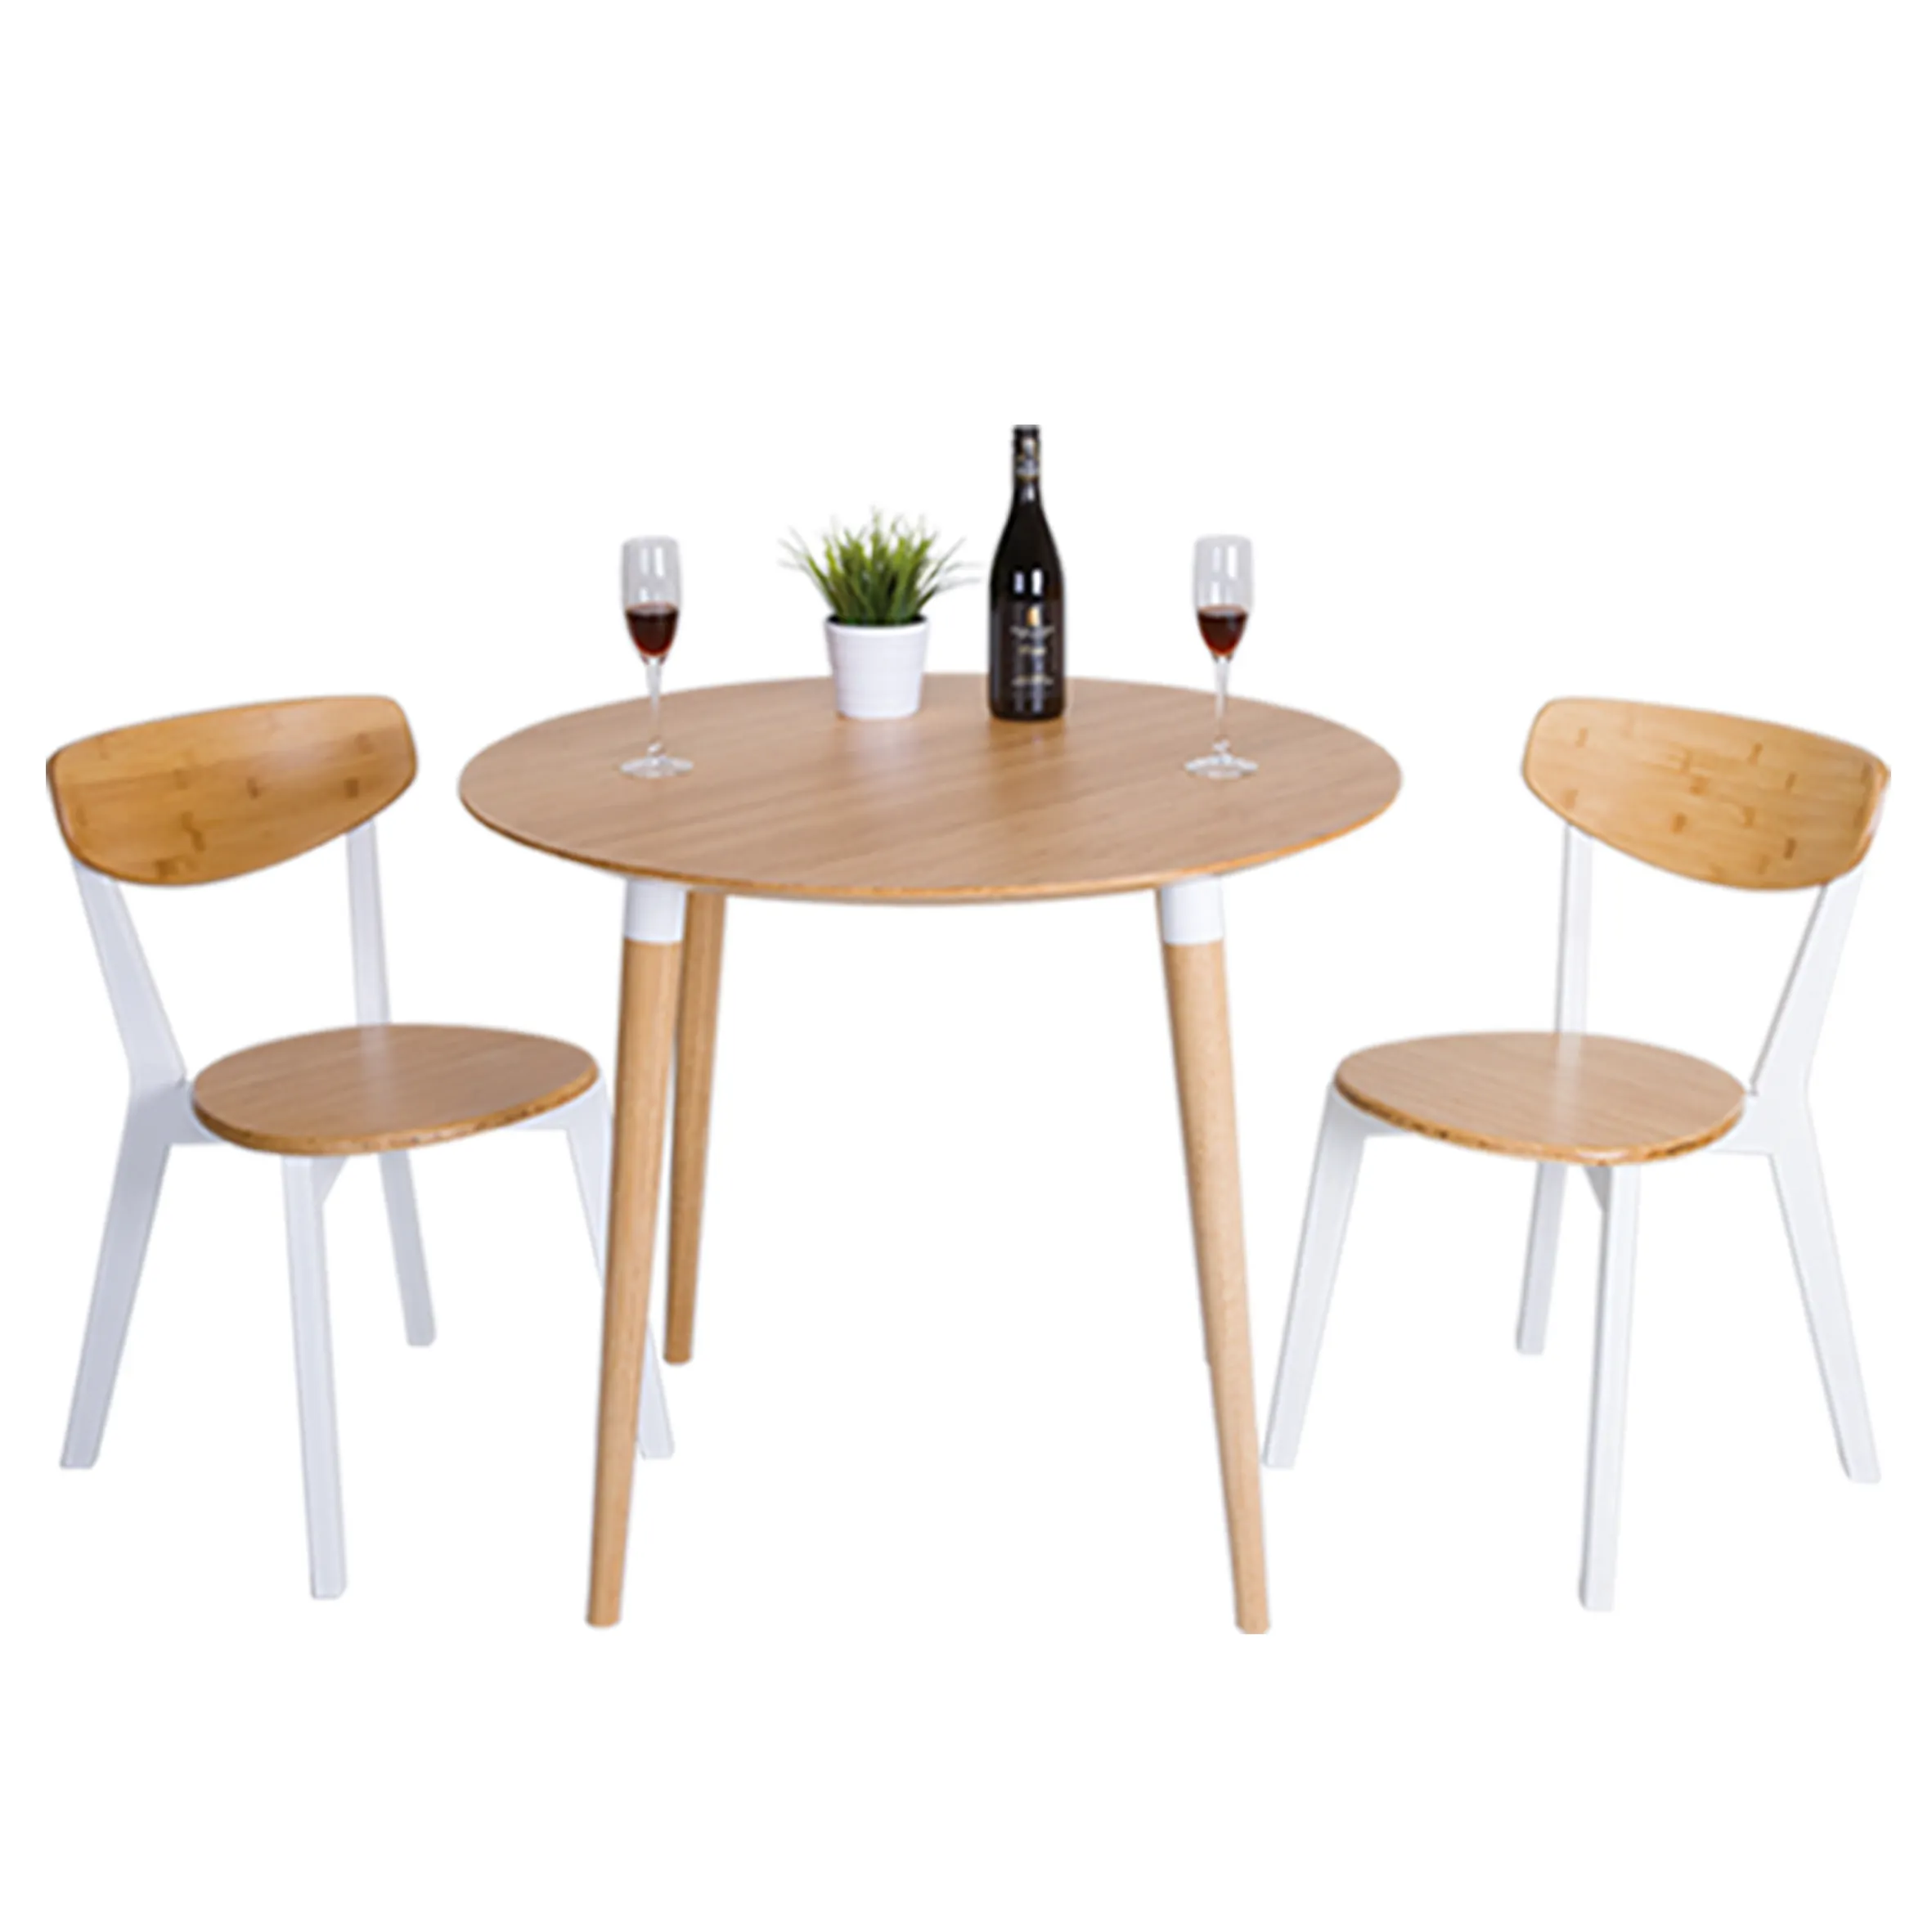 BAMBKIN High quality furniture round bamboo table for dining room